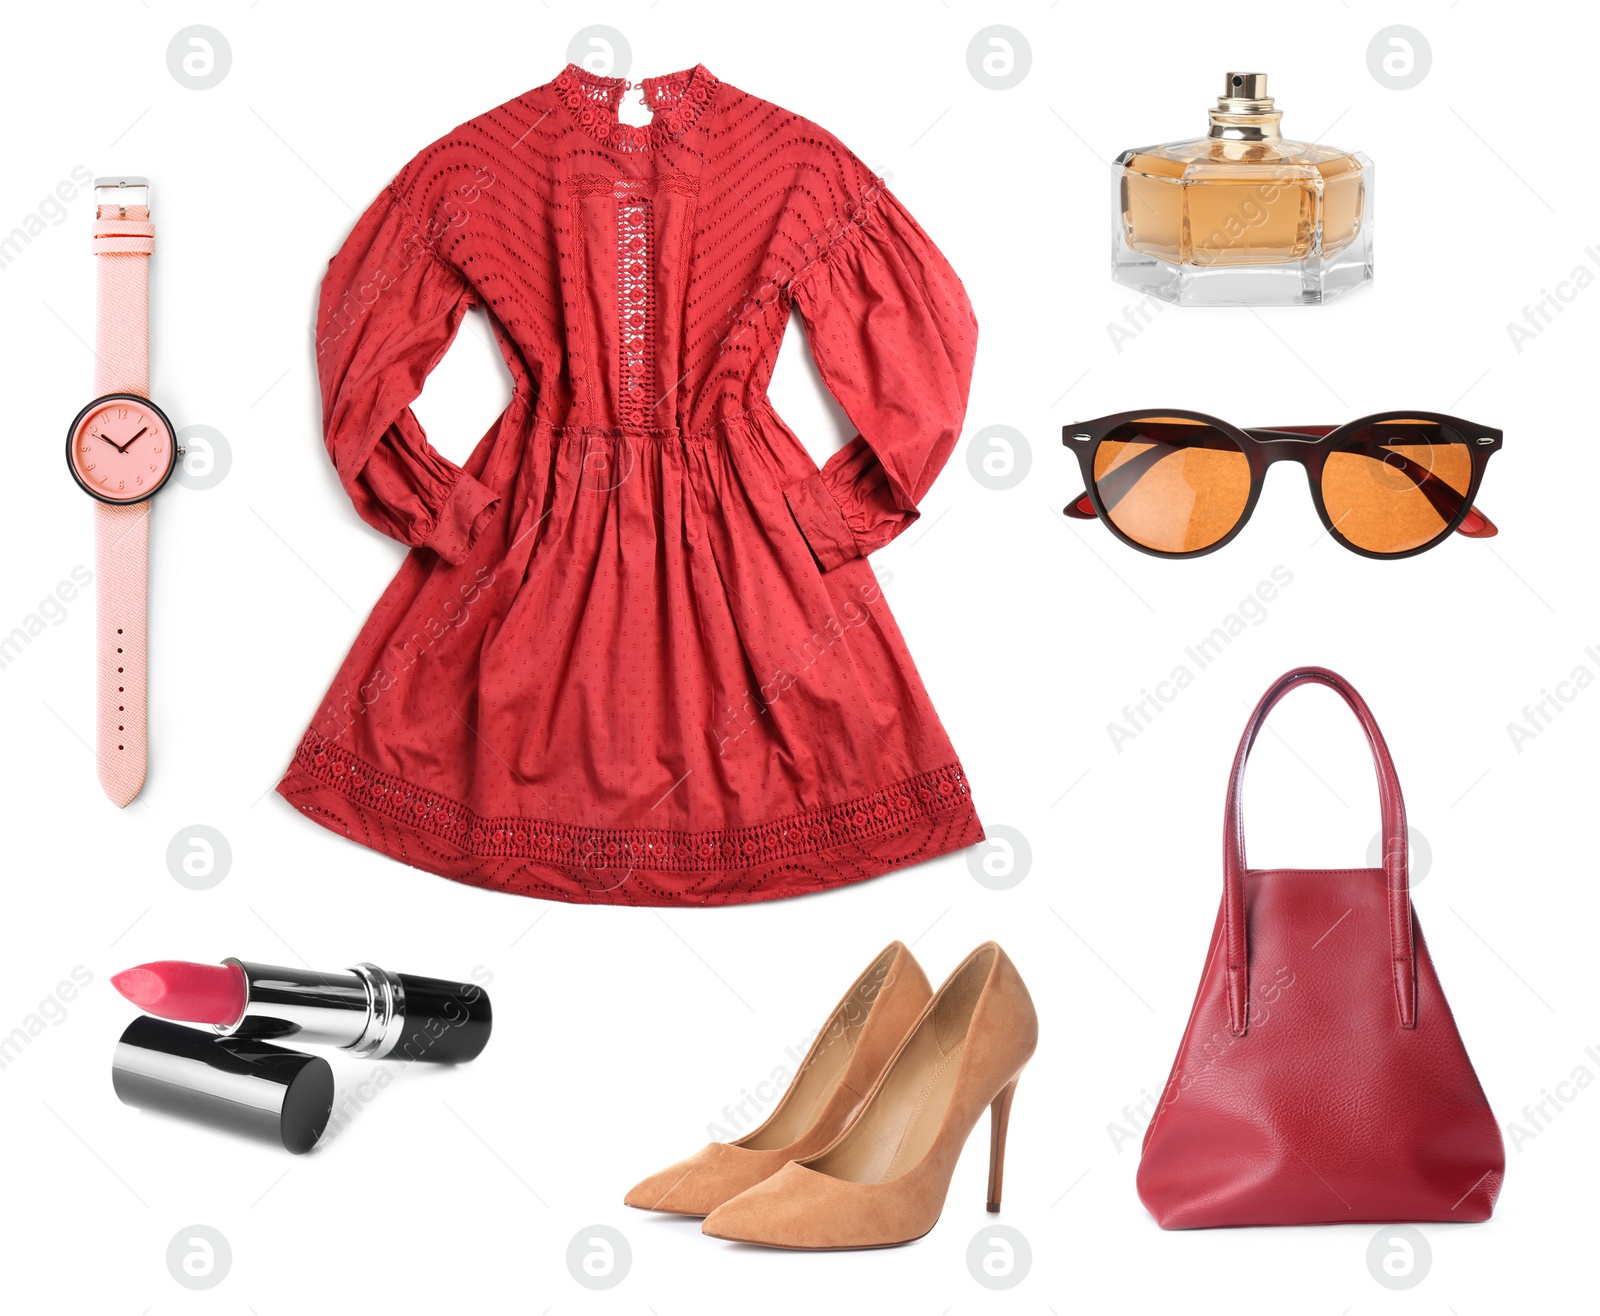 Image of Stylish outfit. Collage with dress, shoes, accessories and cosmetics for woman on white background